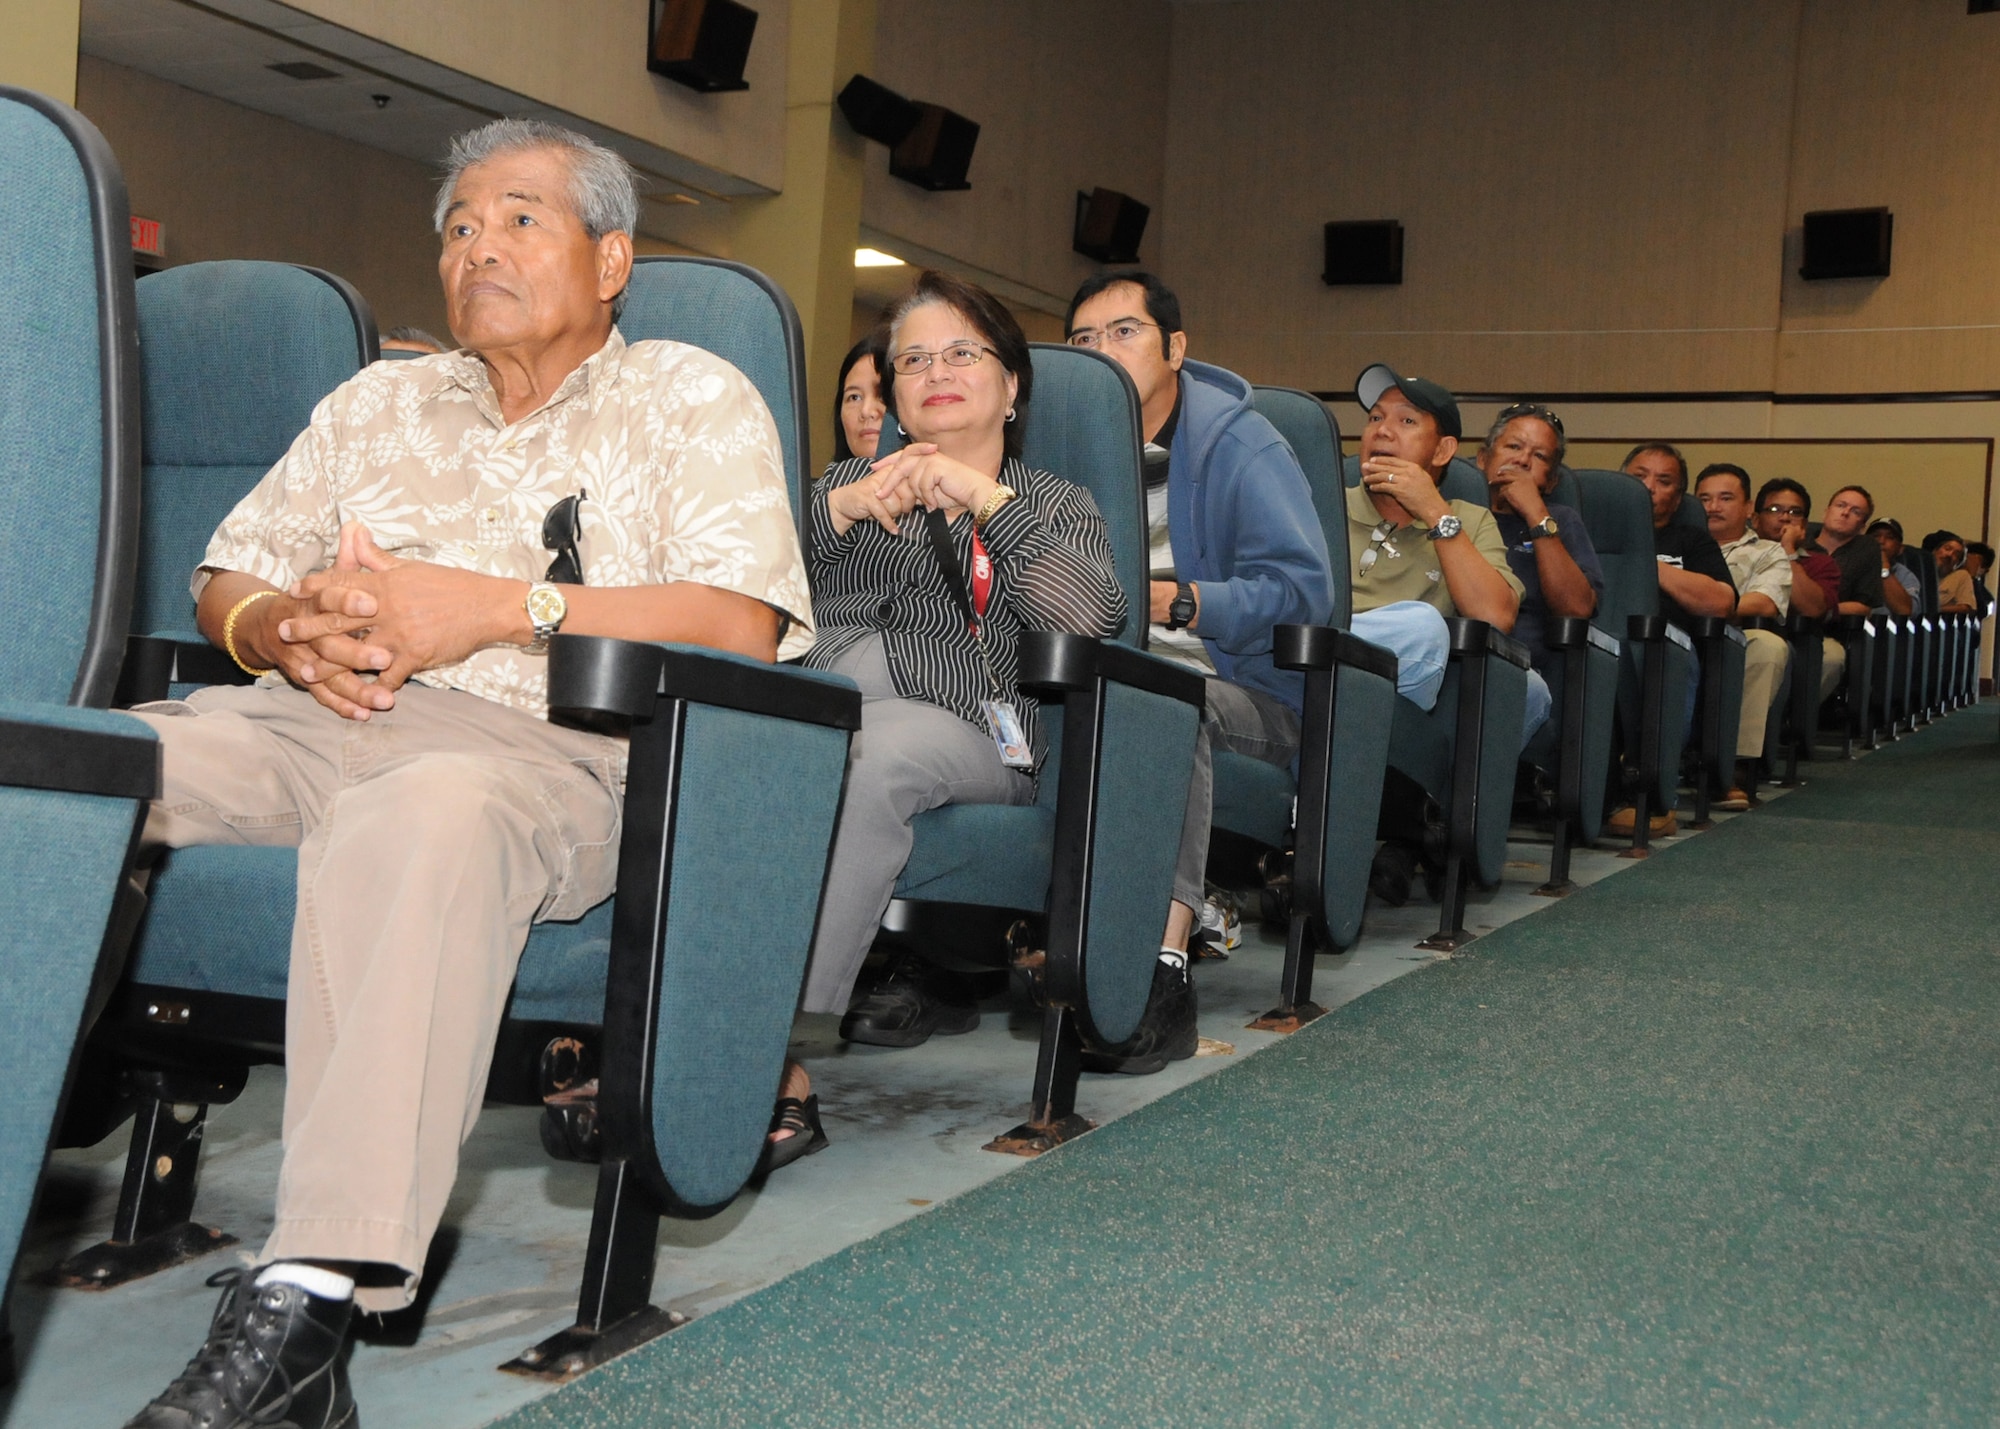 ANDERSEN AIR FORCE BASE, Guam - Air Force Civilians listen as Brig. Gen. Ruhlman speaks about joint basing and what the future holds for these employees during a Town Hall Meeting Nov. 21 at the base theater. (U.S. Air Force photo by Senior Airman Nichelle Griffiths)